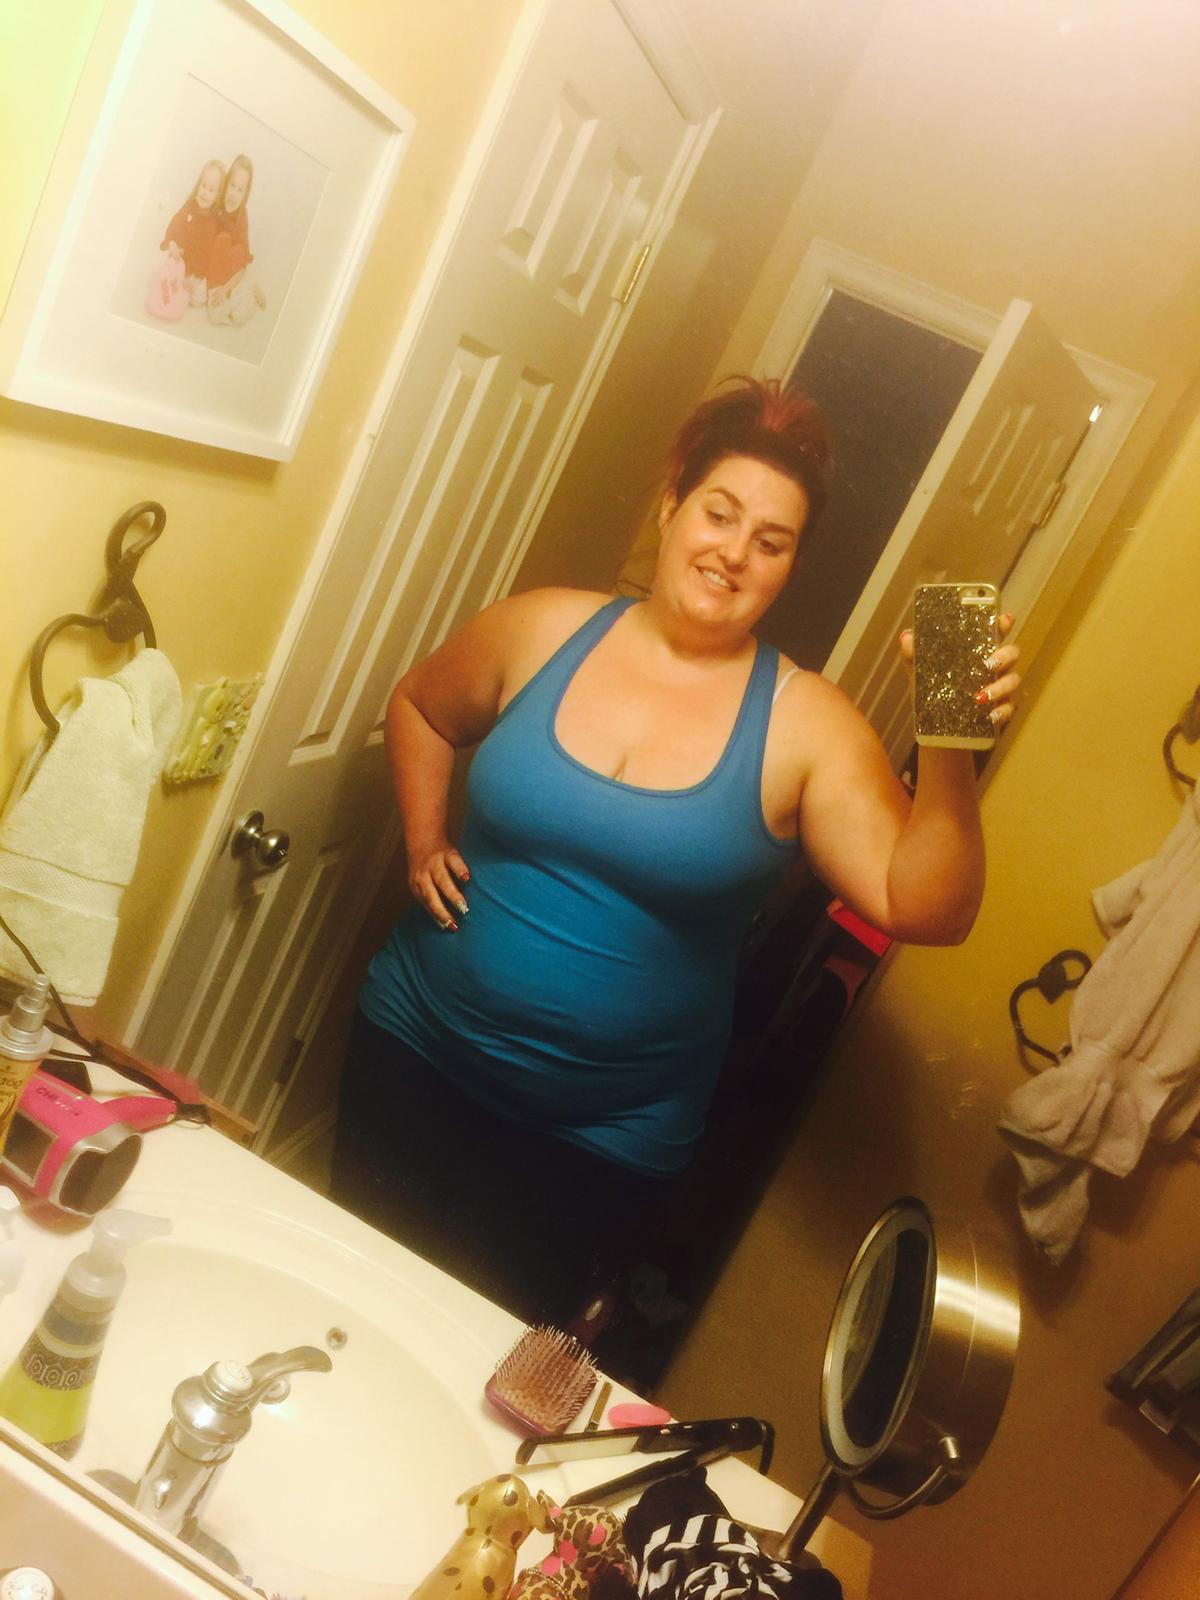 Brittany Cook before losing the weight. (Caters News)